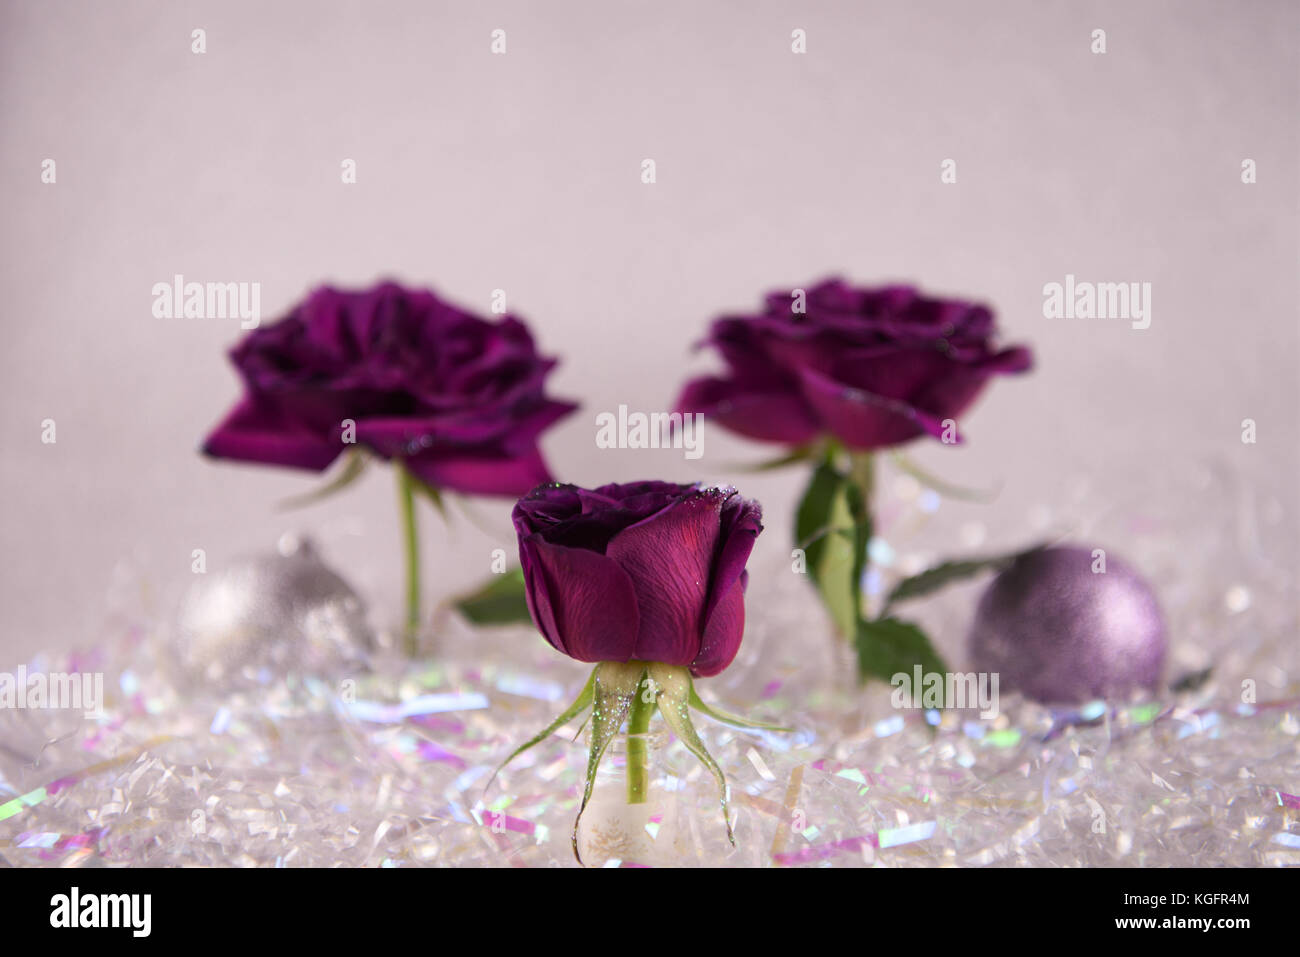 Christmas photograph image of red purple roses flowers with glitter petals and tree decorations of baubles in the background with shiny pink wrap Stock Photo